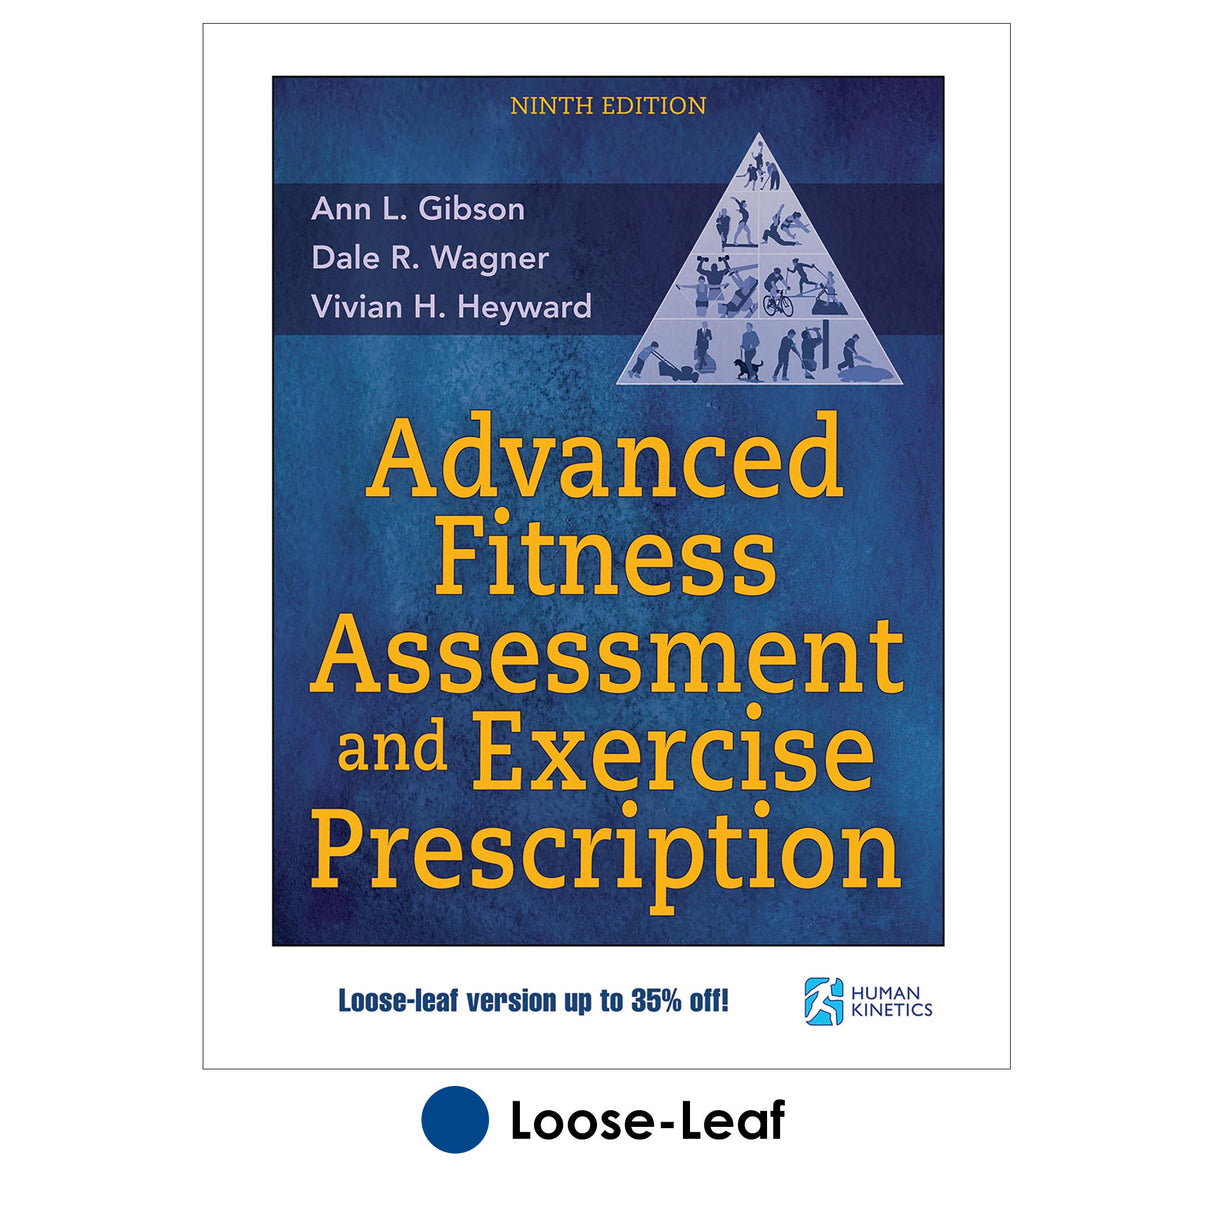 Advanced Fitness Assessment and Exercise Prescription 9th Edition With HKPropel Online Video-Loose-Leaf Edition